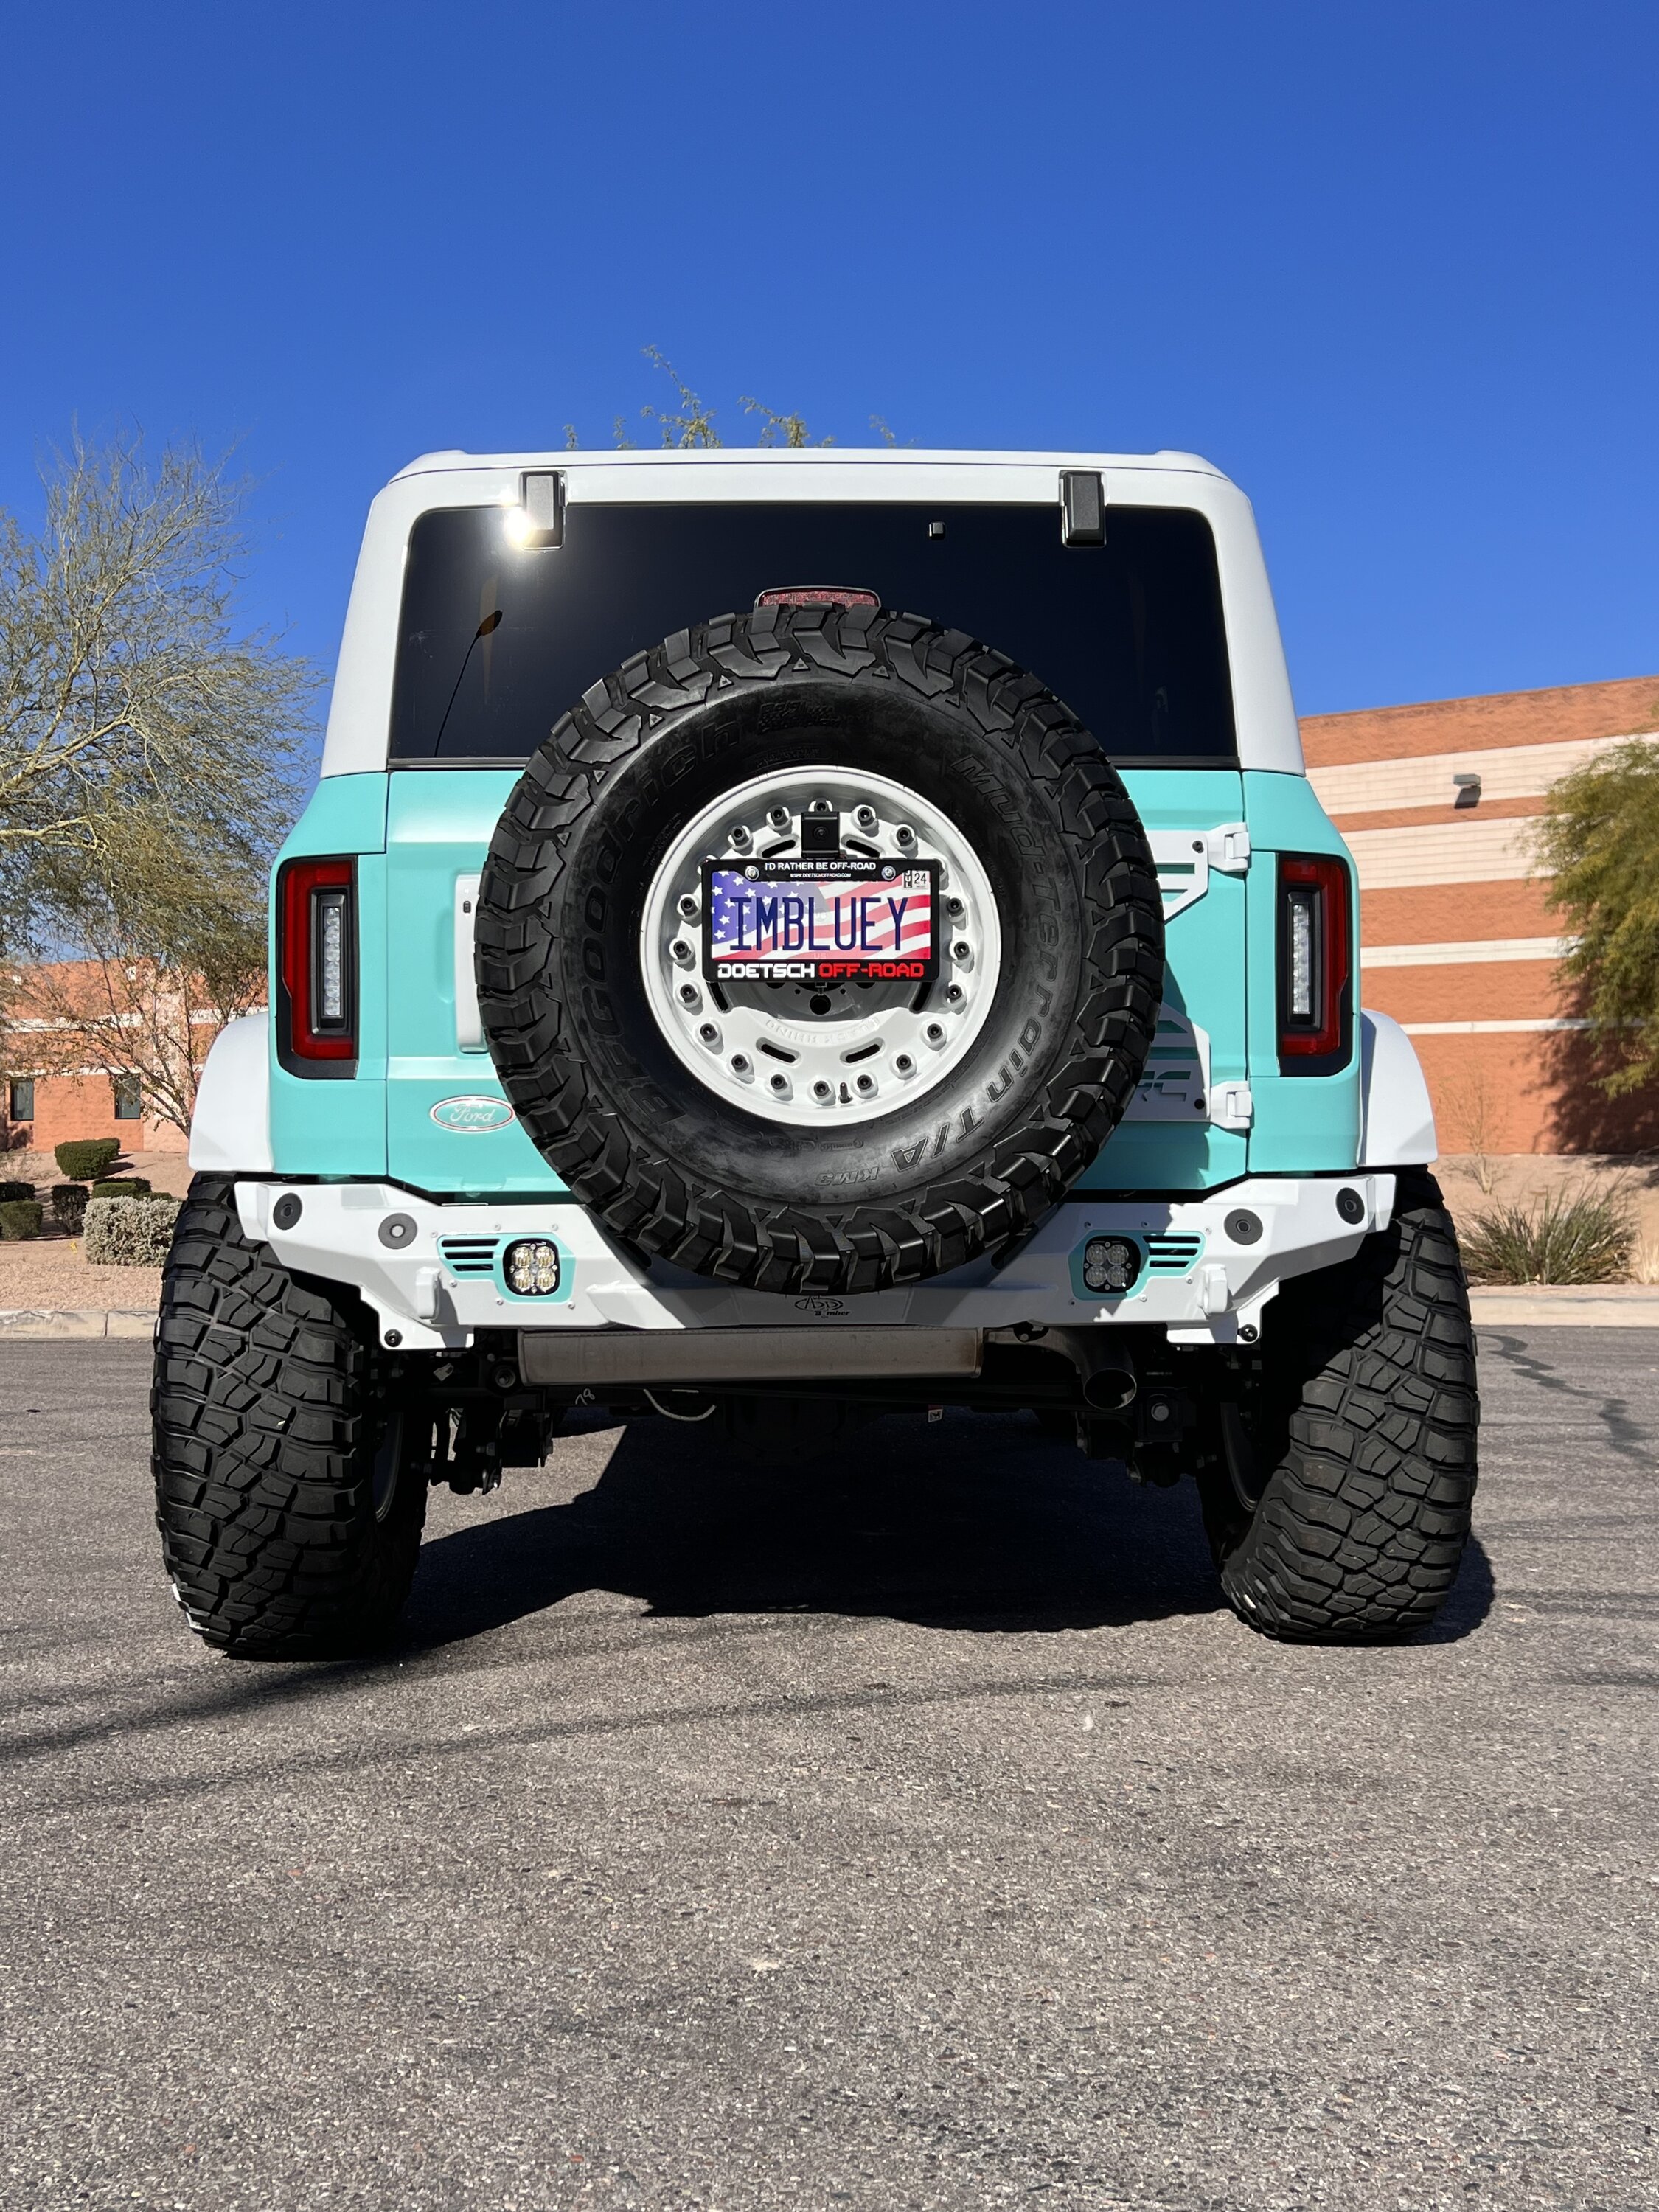 Ford Bronco Full color change: Tiffany paint on retro Bronco build by Doetsch Offroad IMG_9932